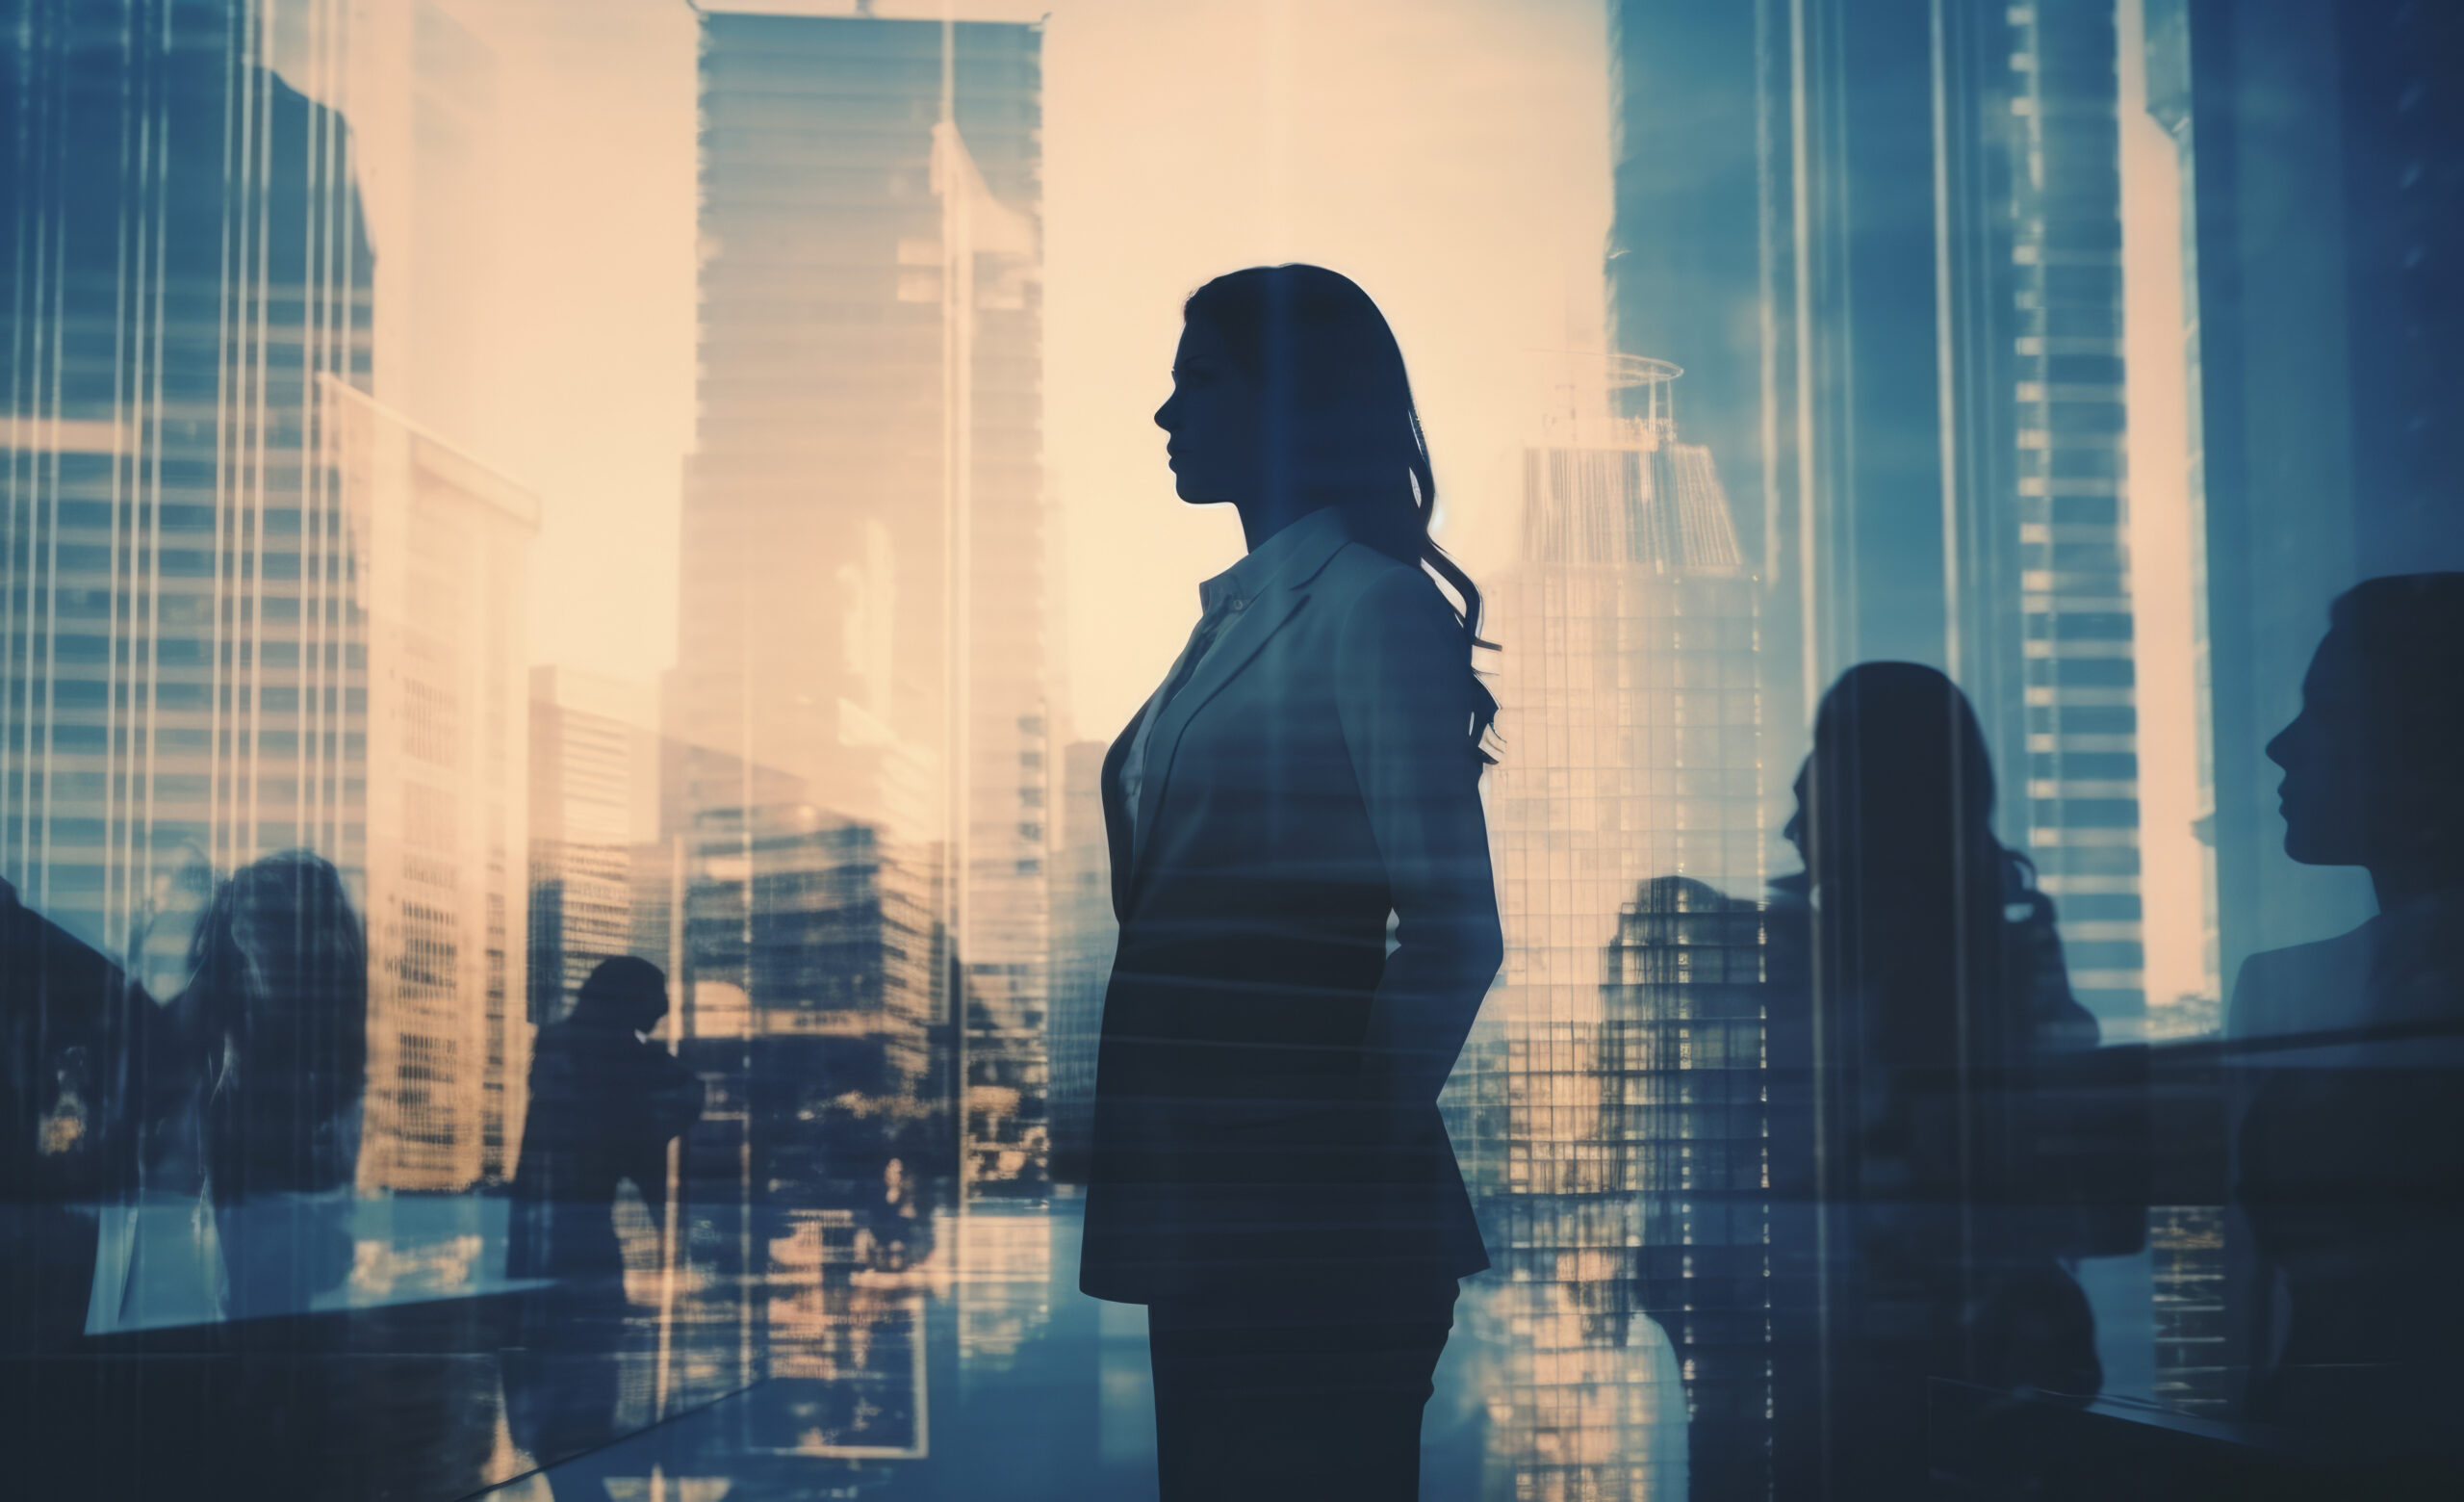 Silhouette of a female businesswoman double exposure against an urban city background.